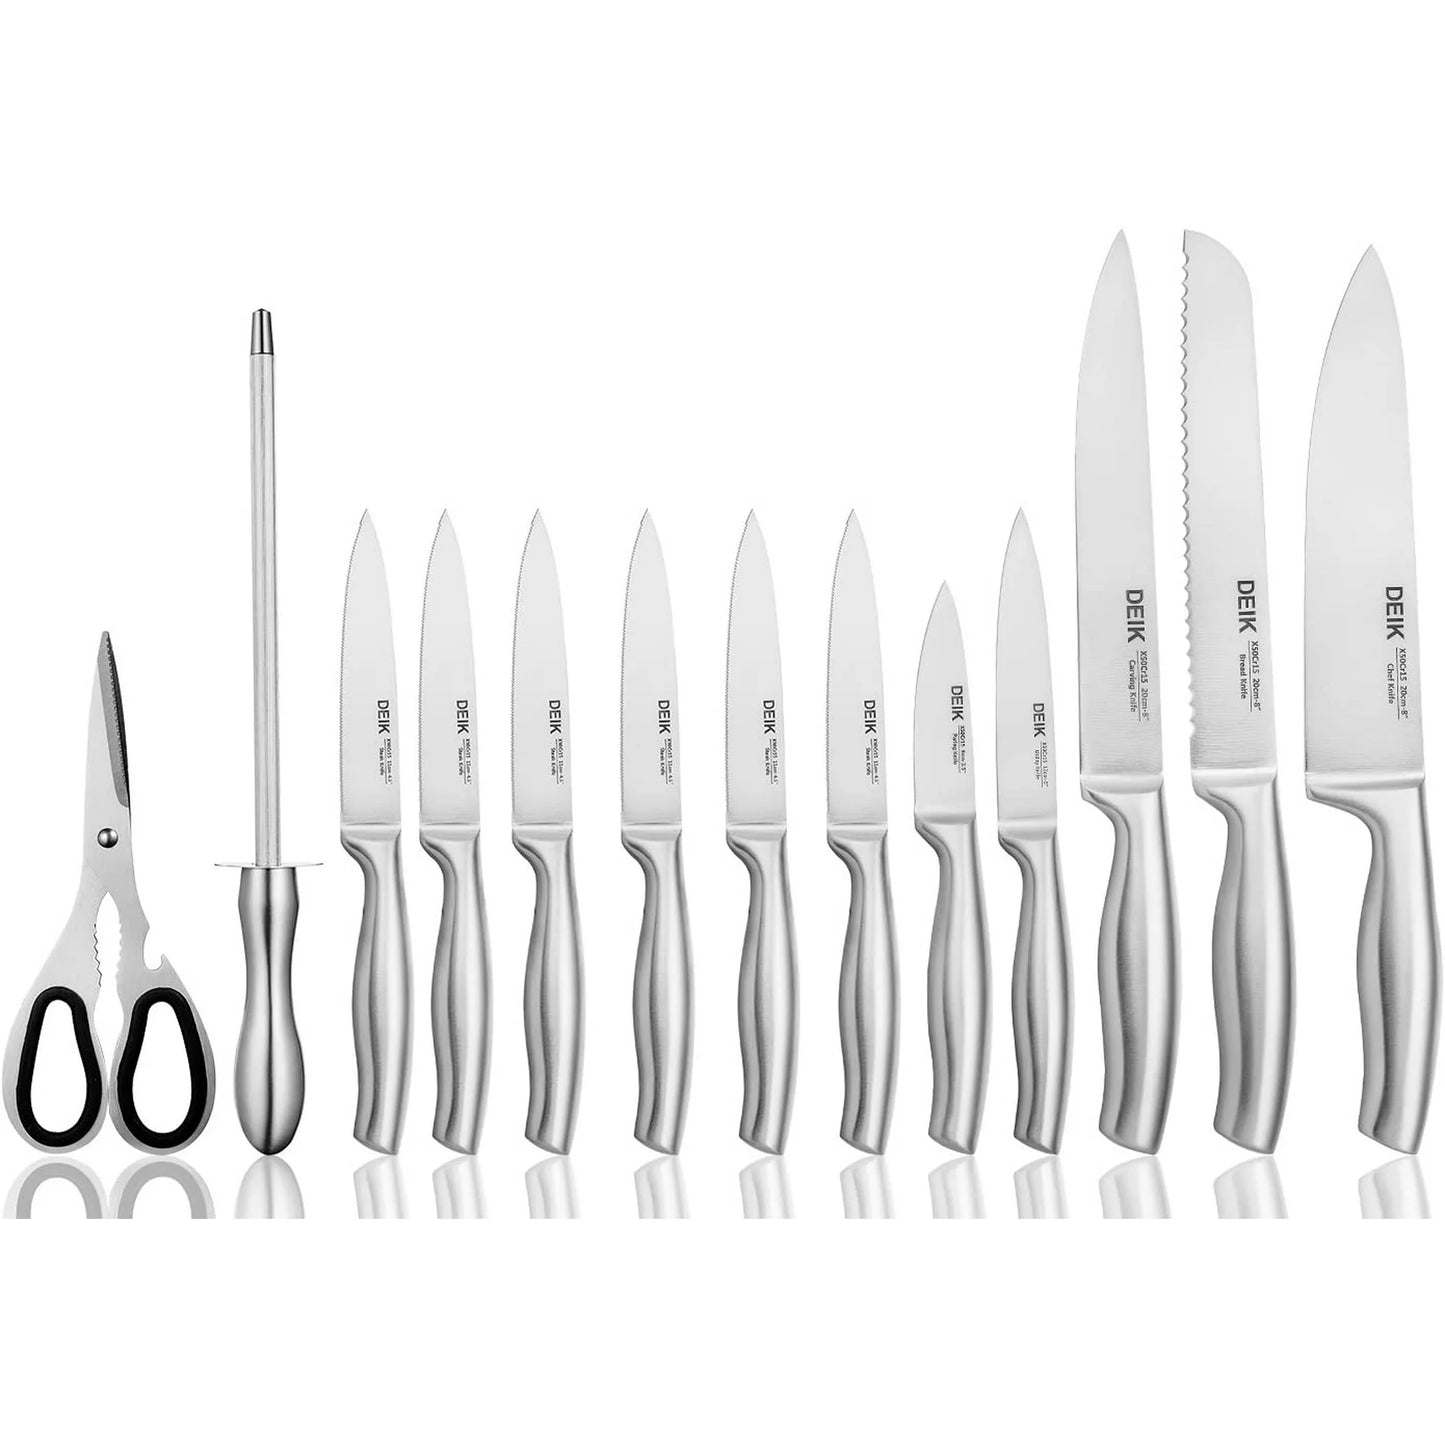 Deik Knife Set, 14 Pieces Stainless Steel Knife Set with Acrylic Stand